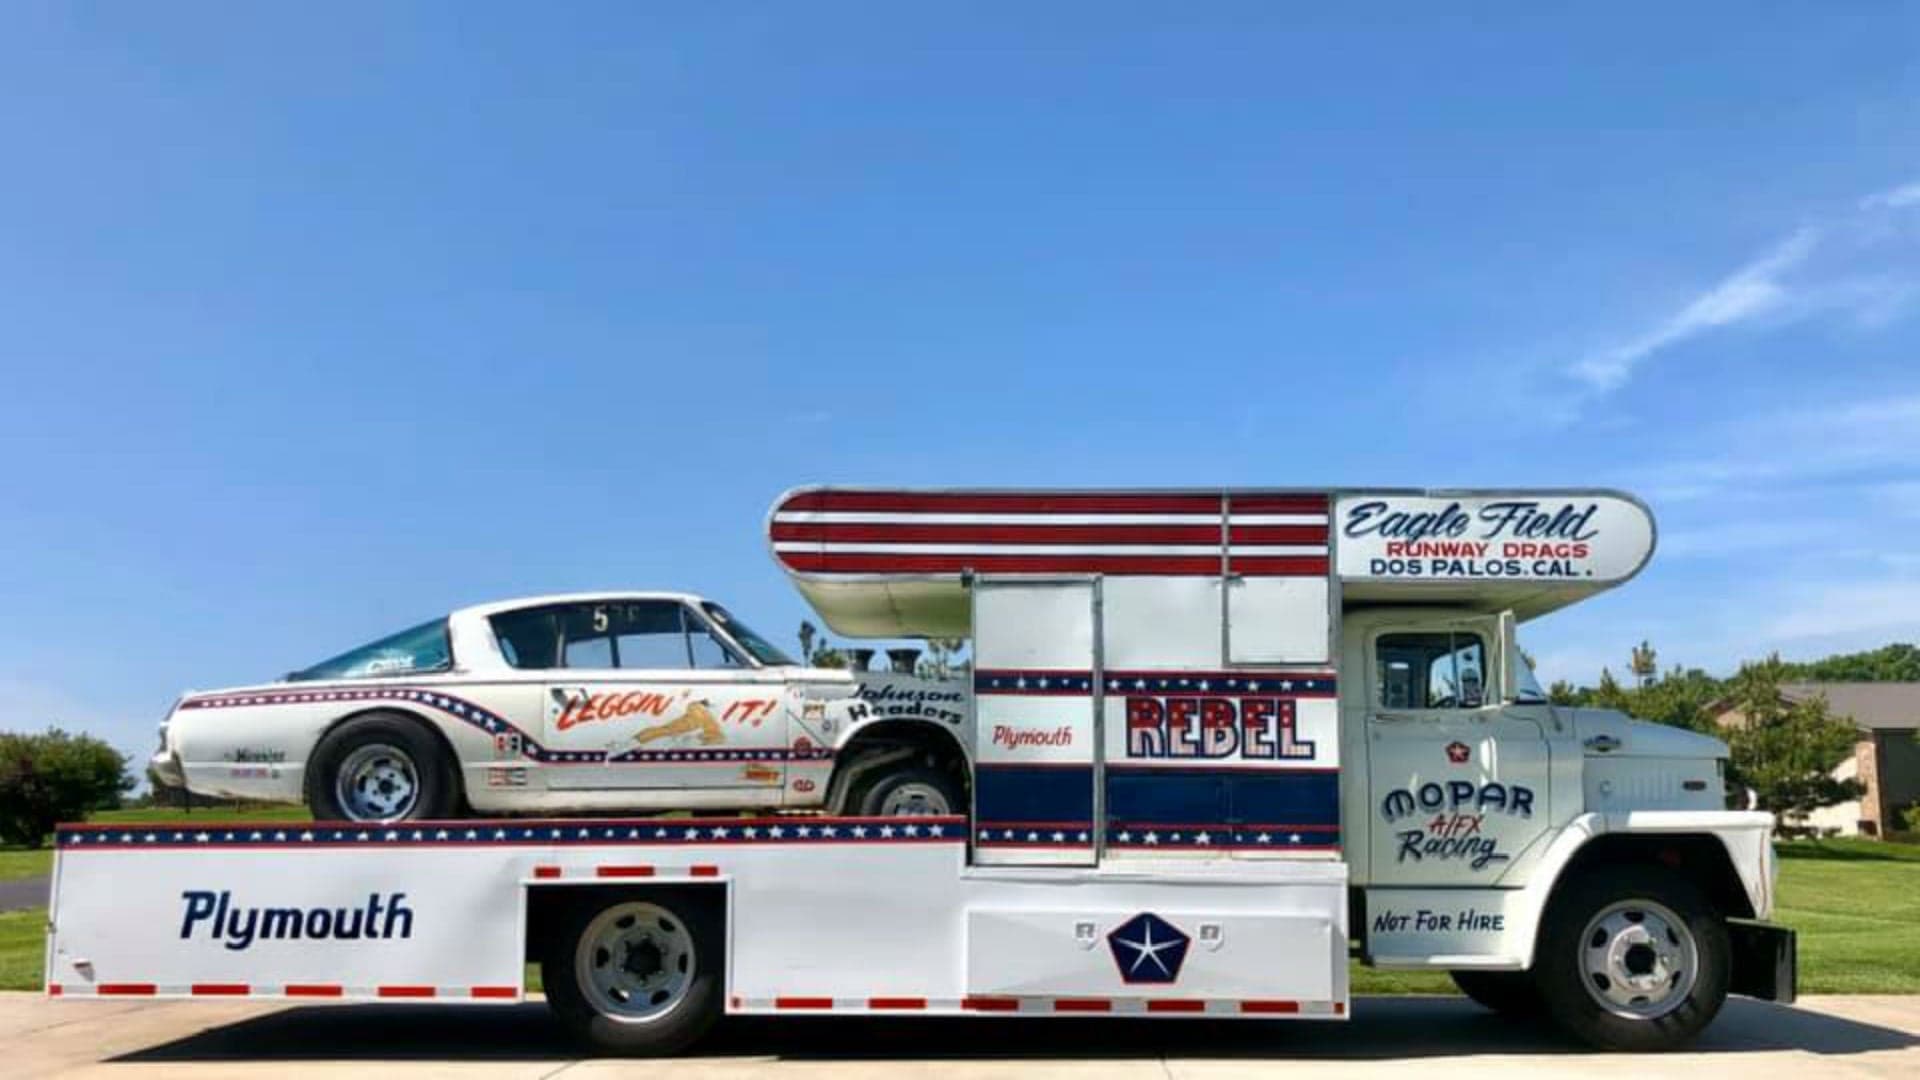 For Sale: 1966 Plymouth Barracuda Drag Racer With Matching ’65 Dodge Hauler Truck